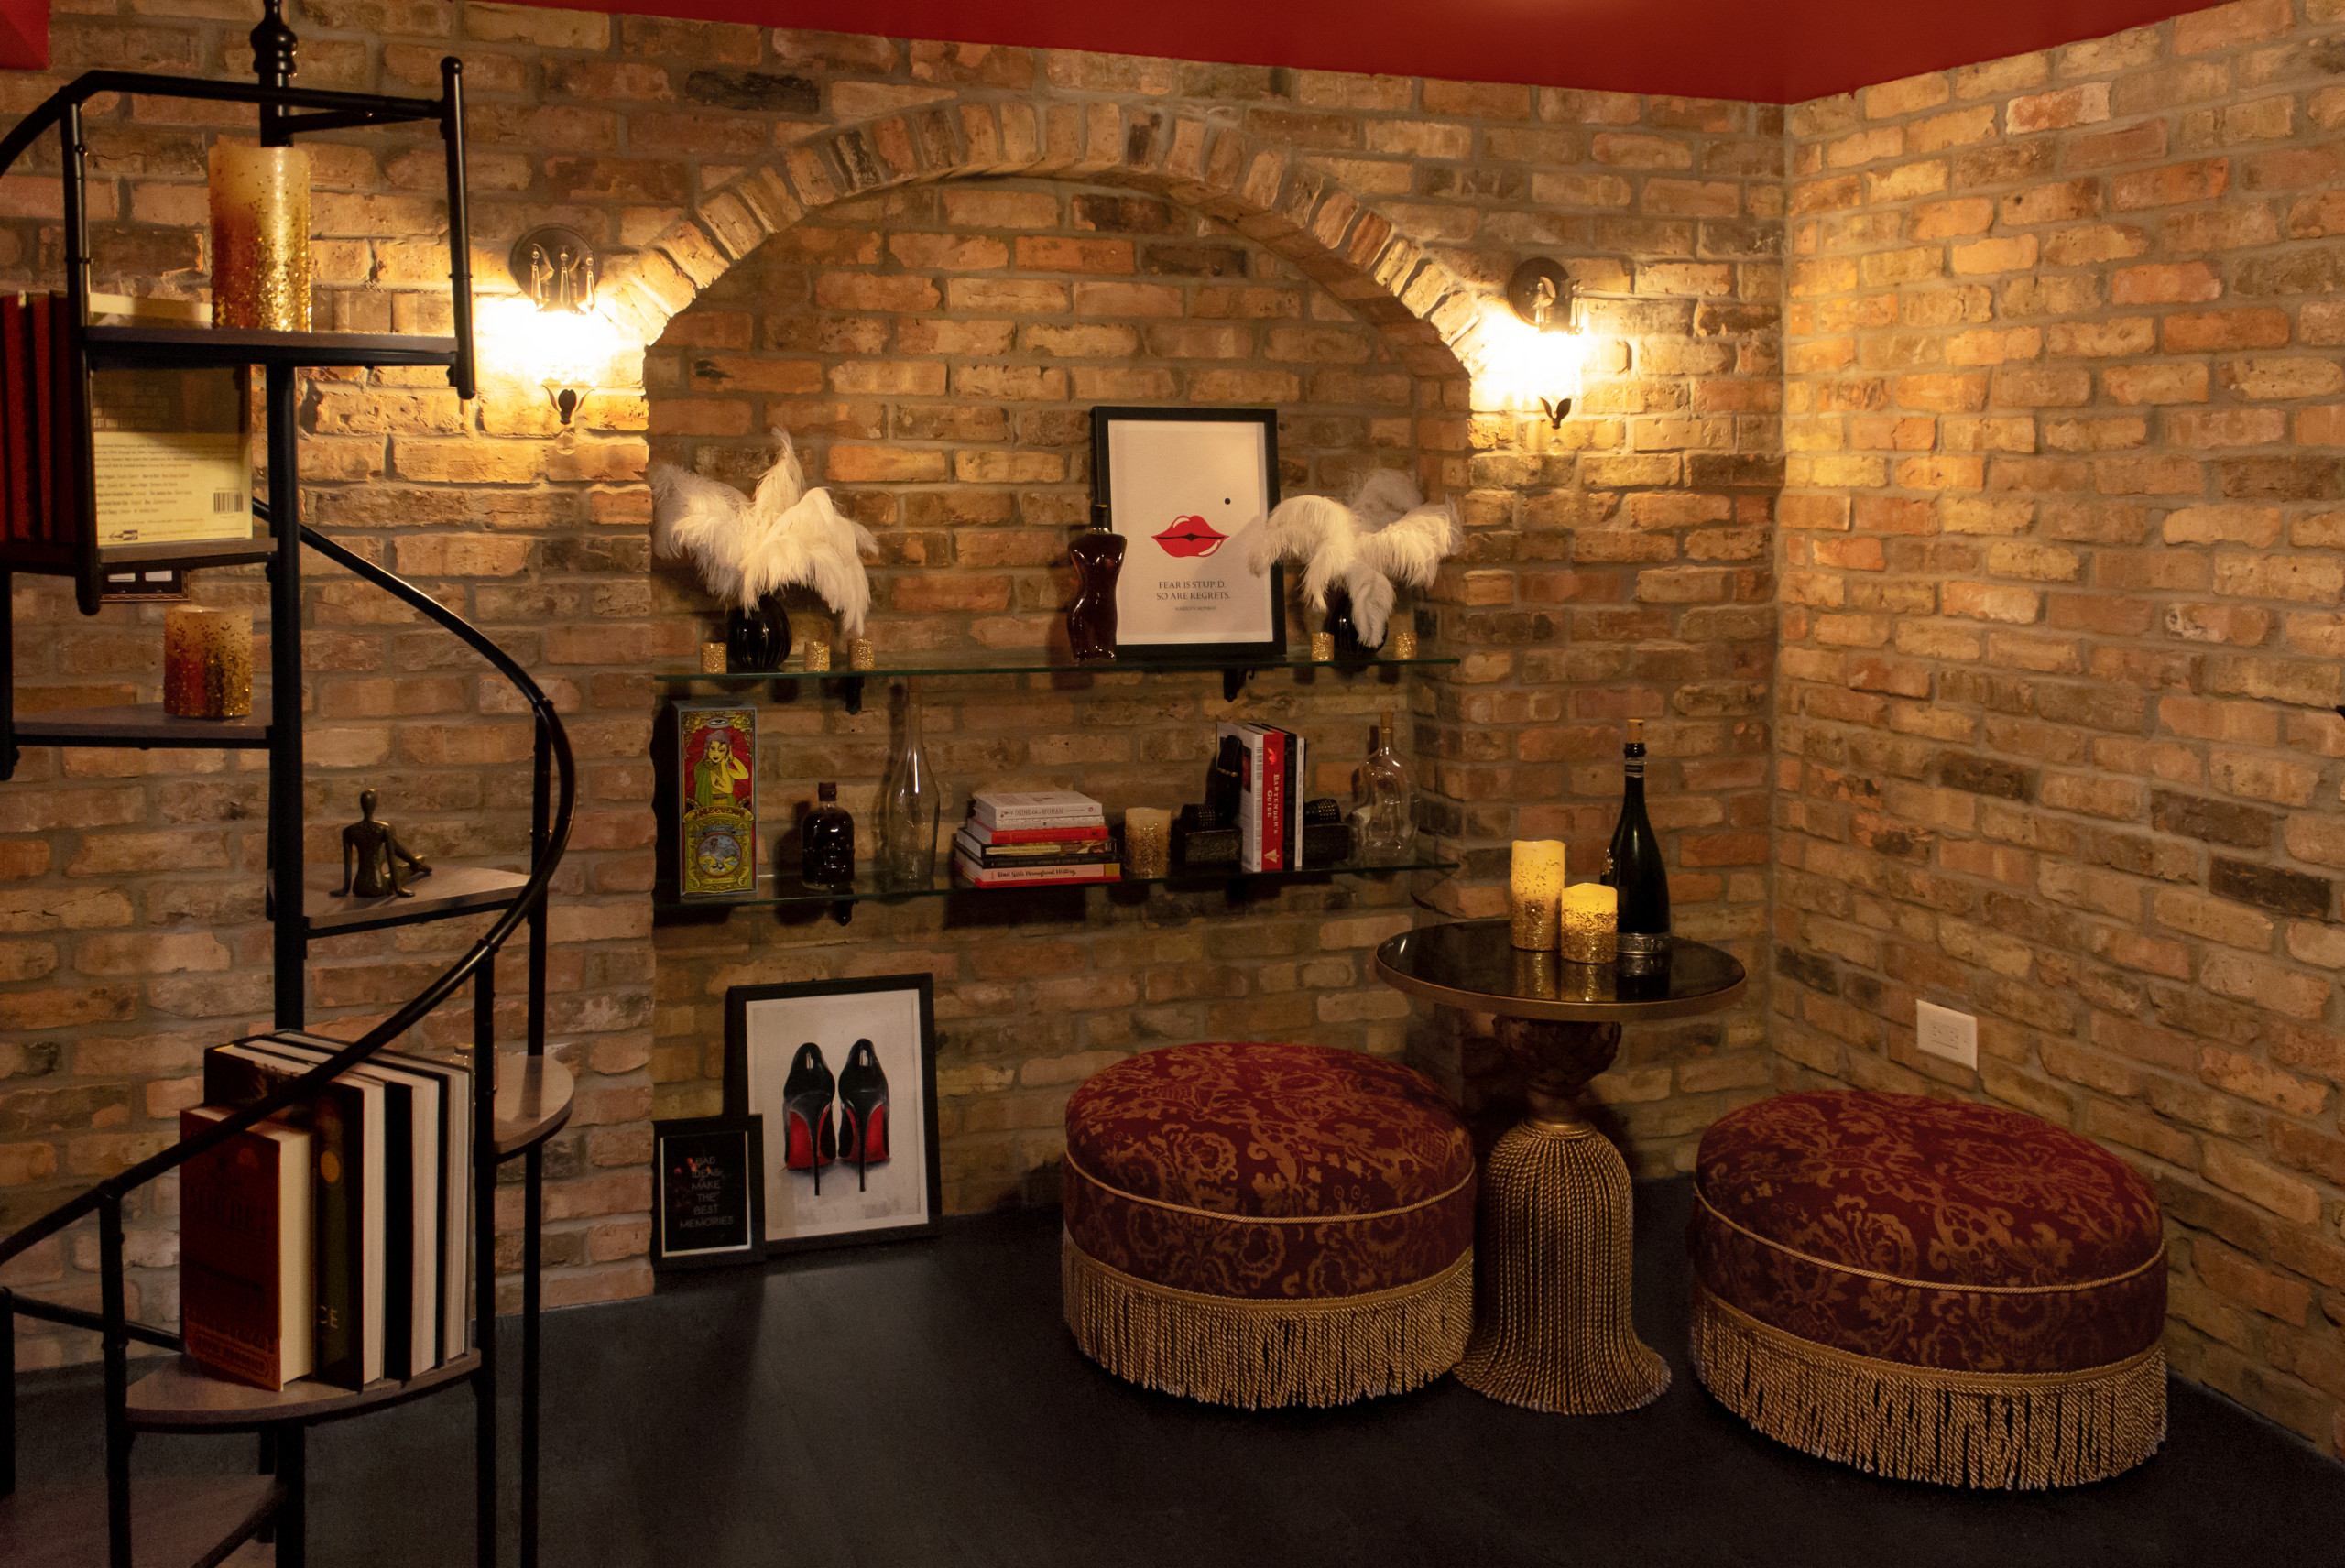 How to Create a Home Speakeasy Bar in Your Basement  Speakeasy bar, Black  room decor, Speakeasy decor bar